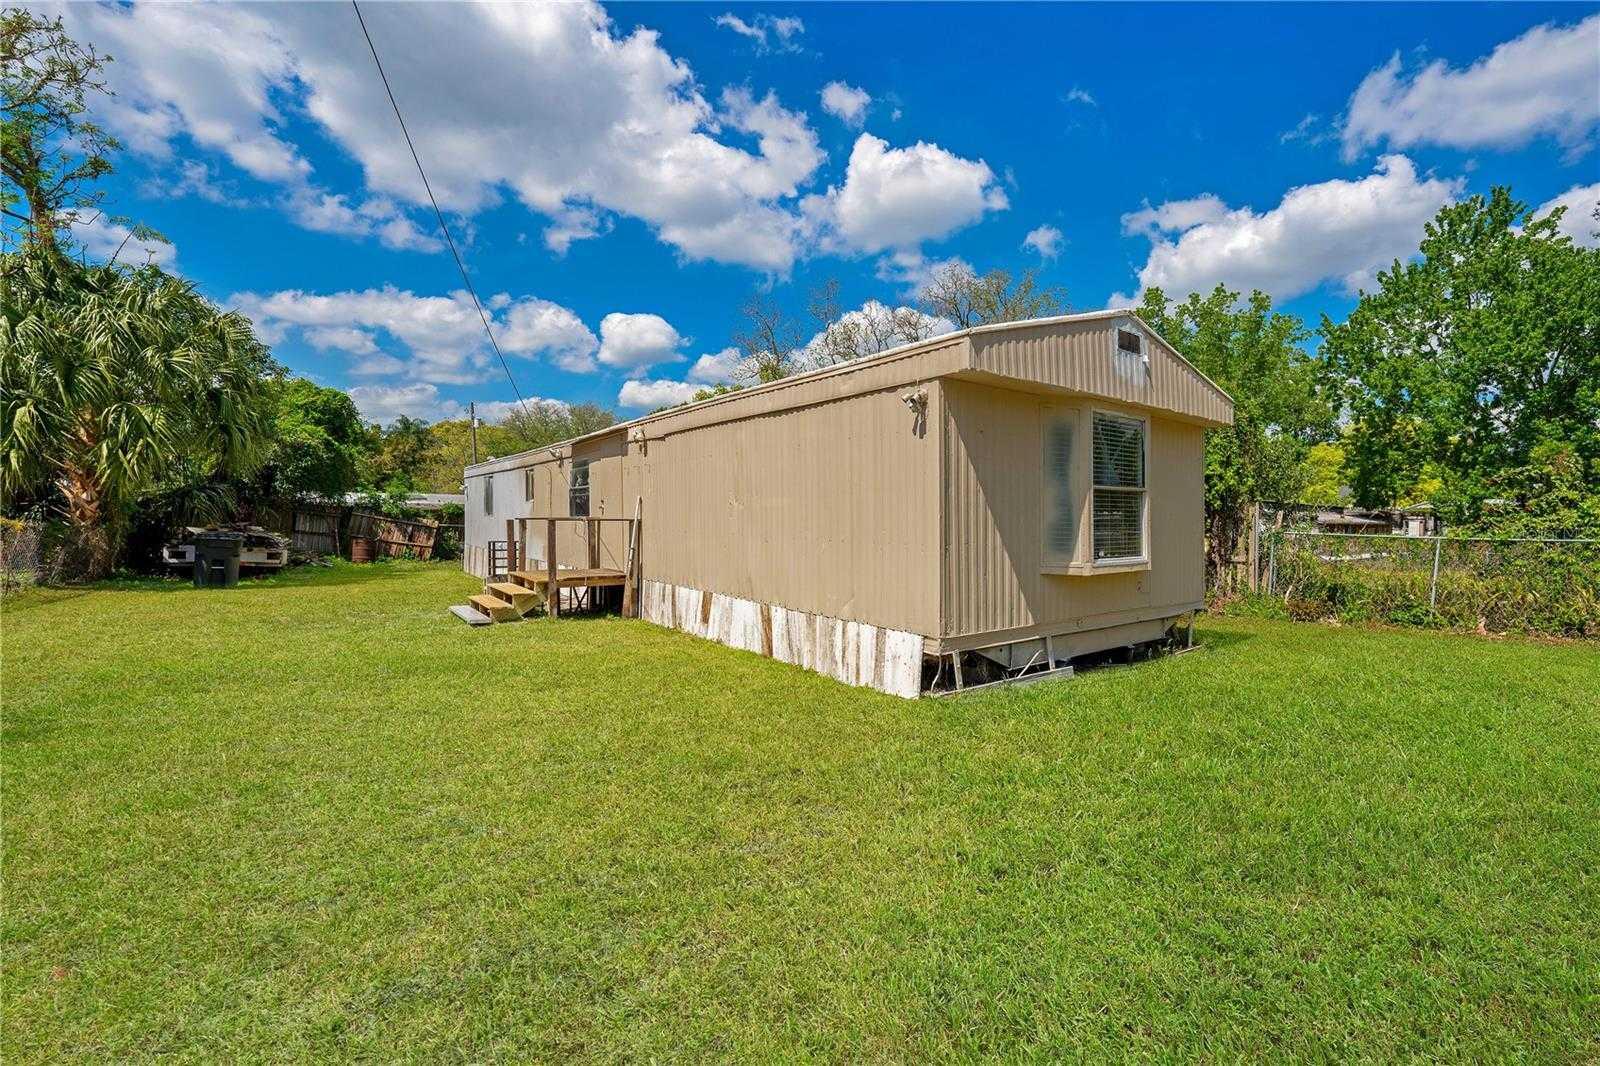 168 MANOR, ALTAMONTE SPRINGS, Manufactured Home - Post 1977,  for sale, The Mount Dora Group 